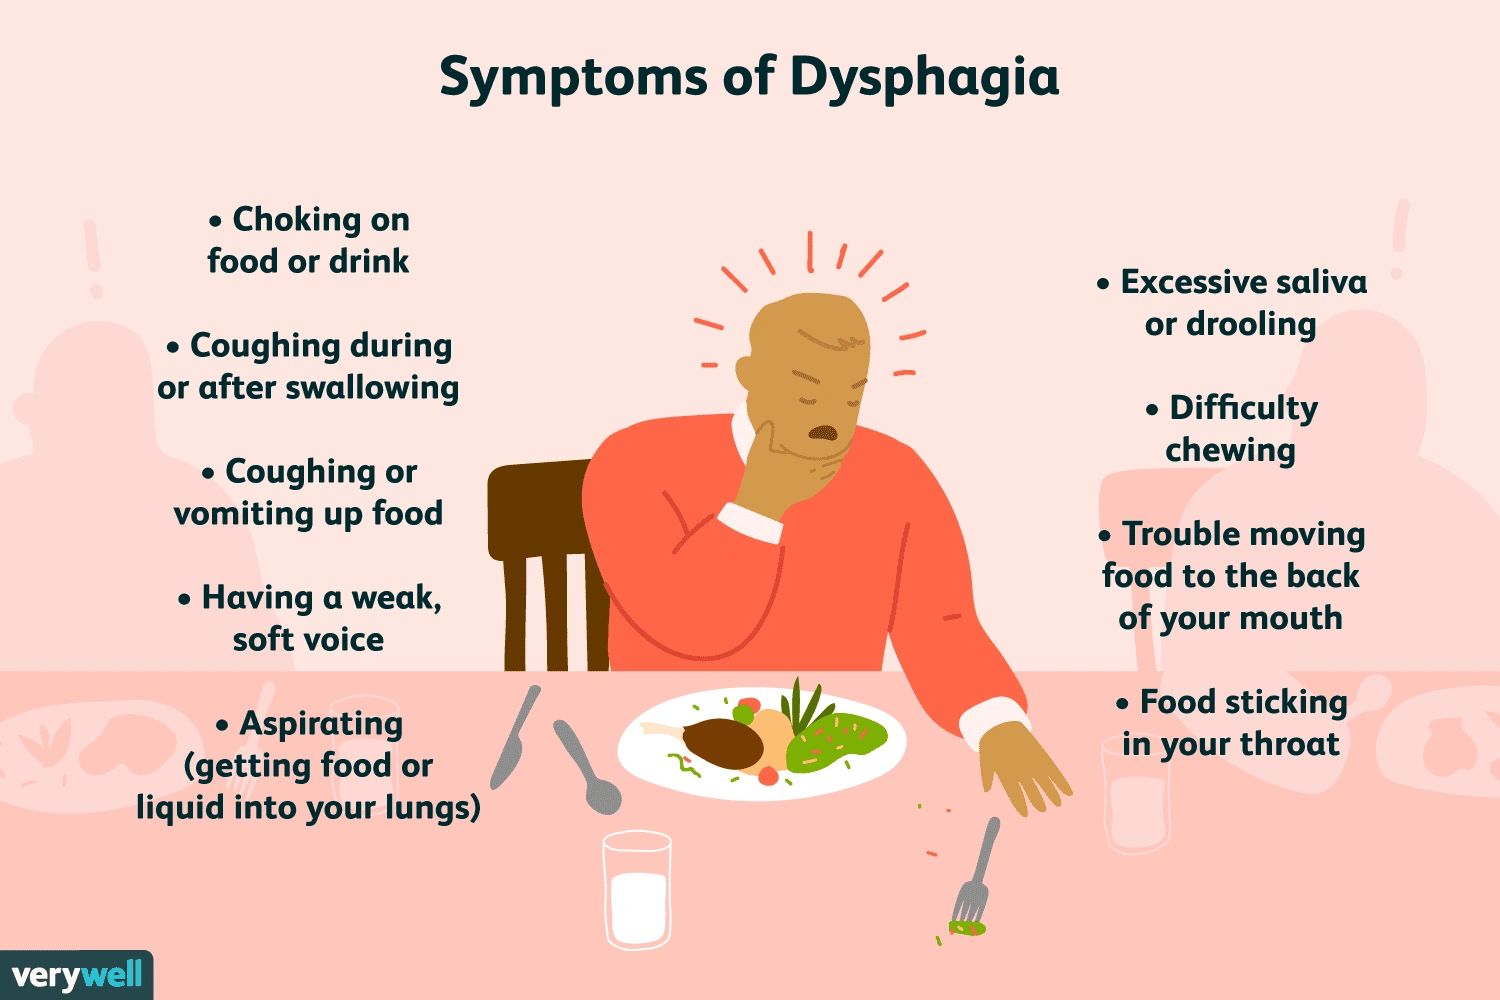 trouble swallowing
dysphagia
difficulty swallowing
gagging
choking
lump in throat
food gets caught